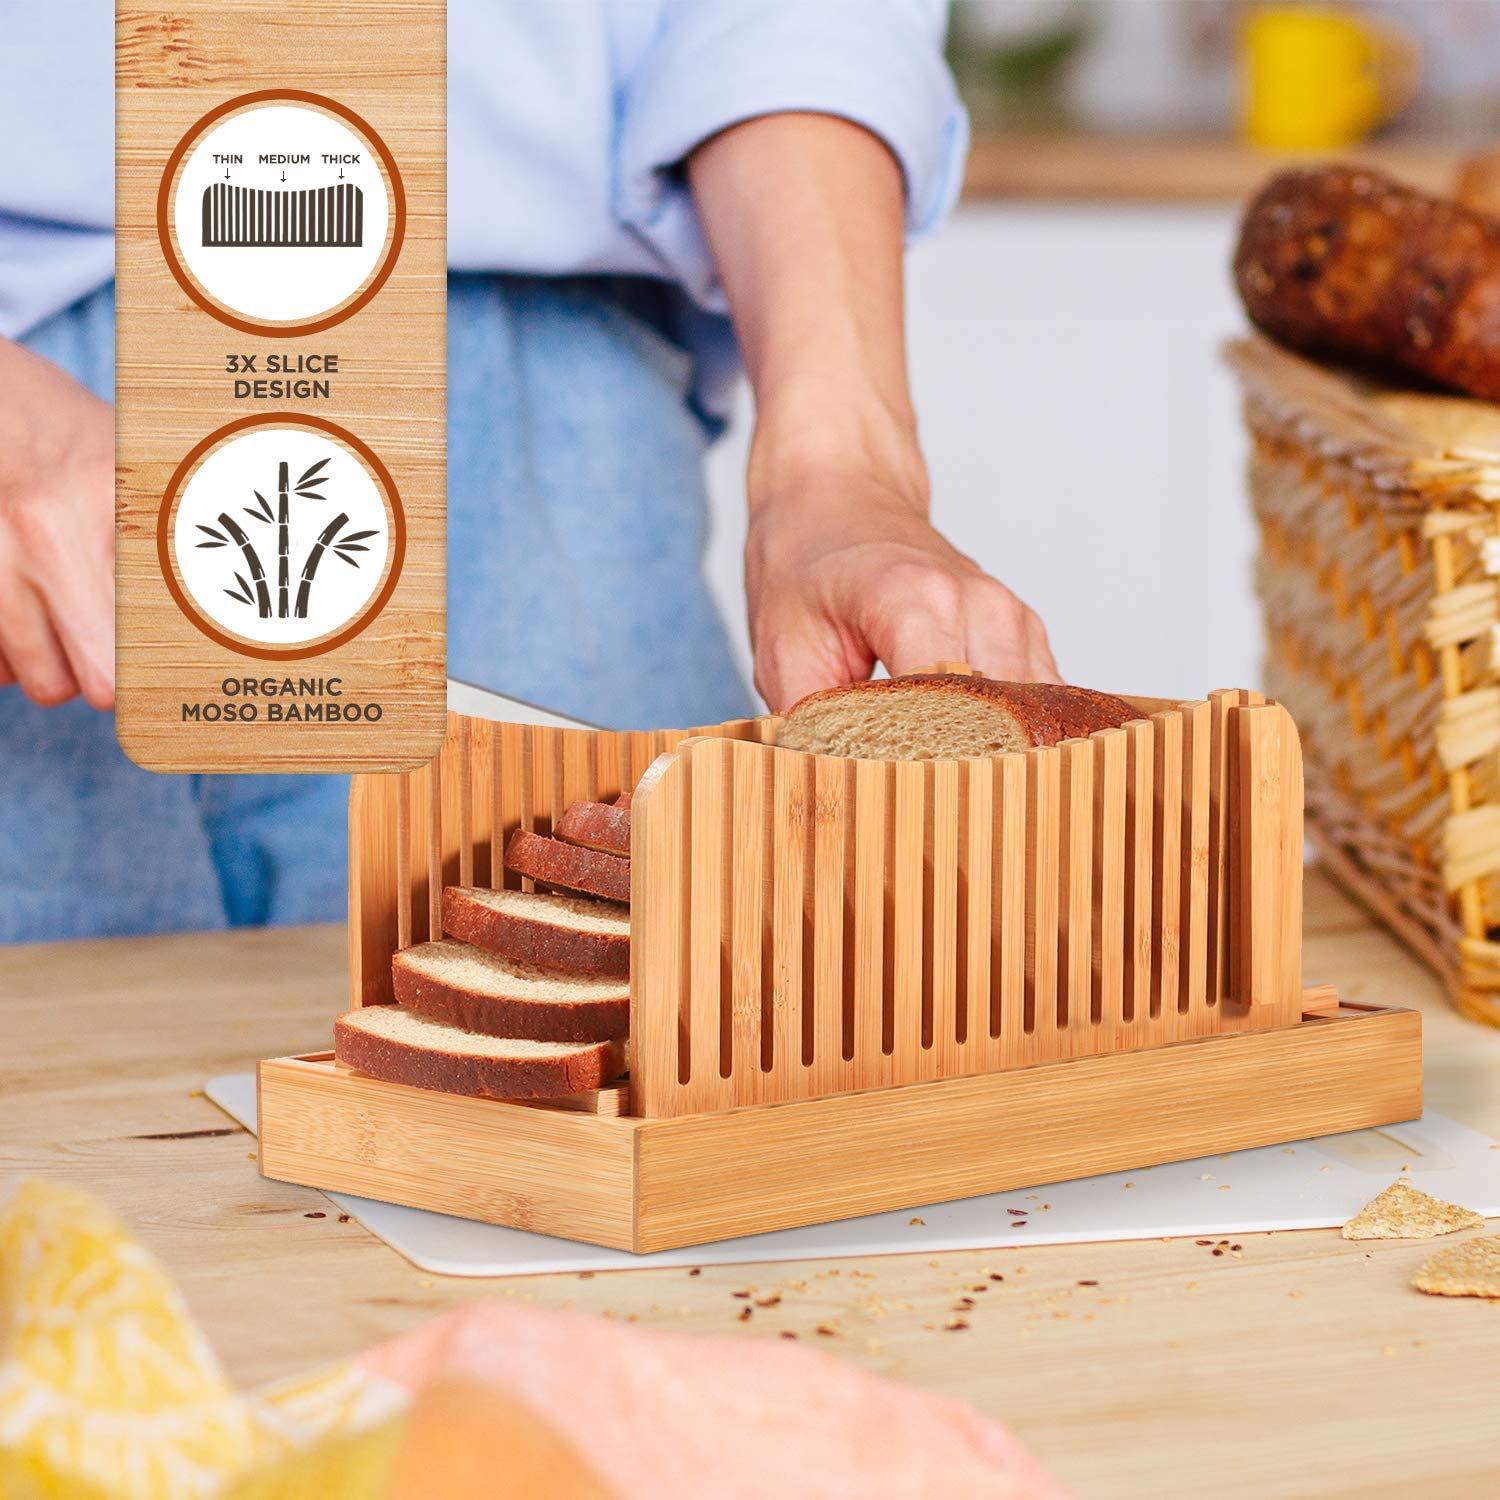 Premium Bamboo Bread Slicer with Knife - Cutting Guide for Homemade Bread, Cakes, Bagels - Foldable and Compact with Crumb Tray and Stainless-Steel Knife